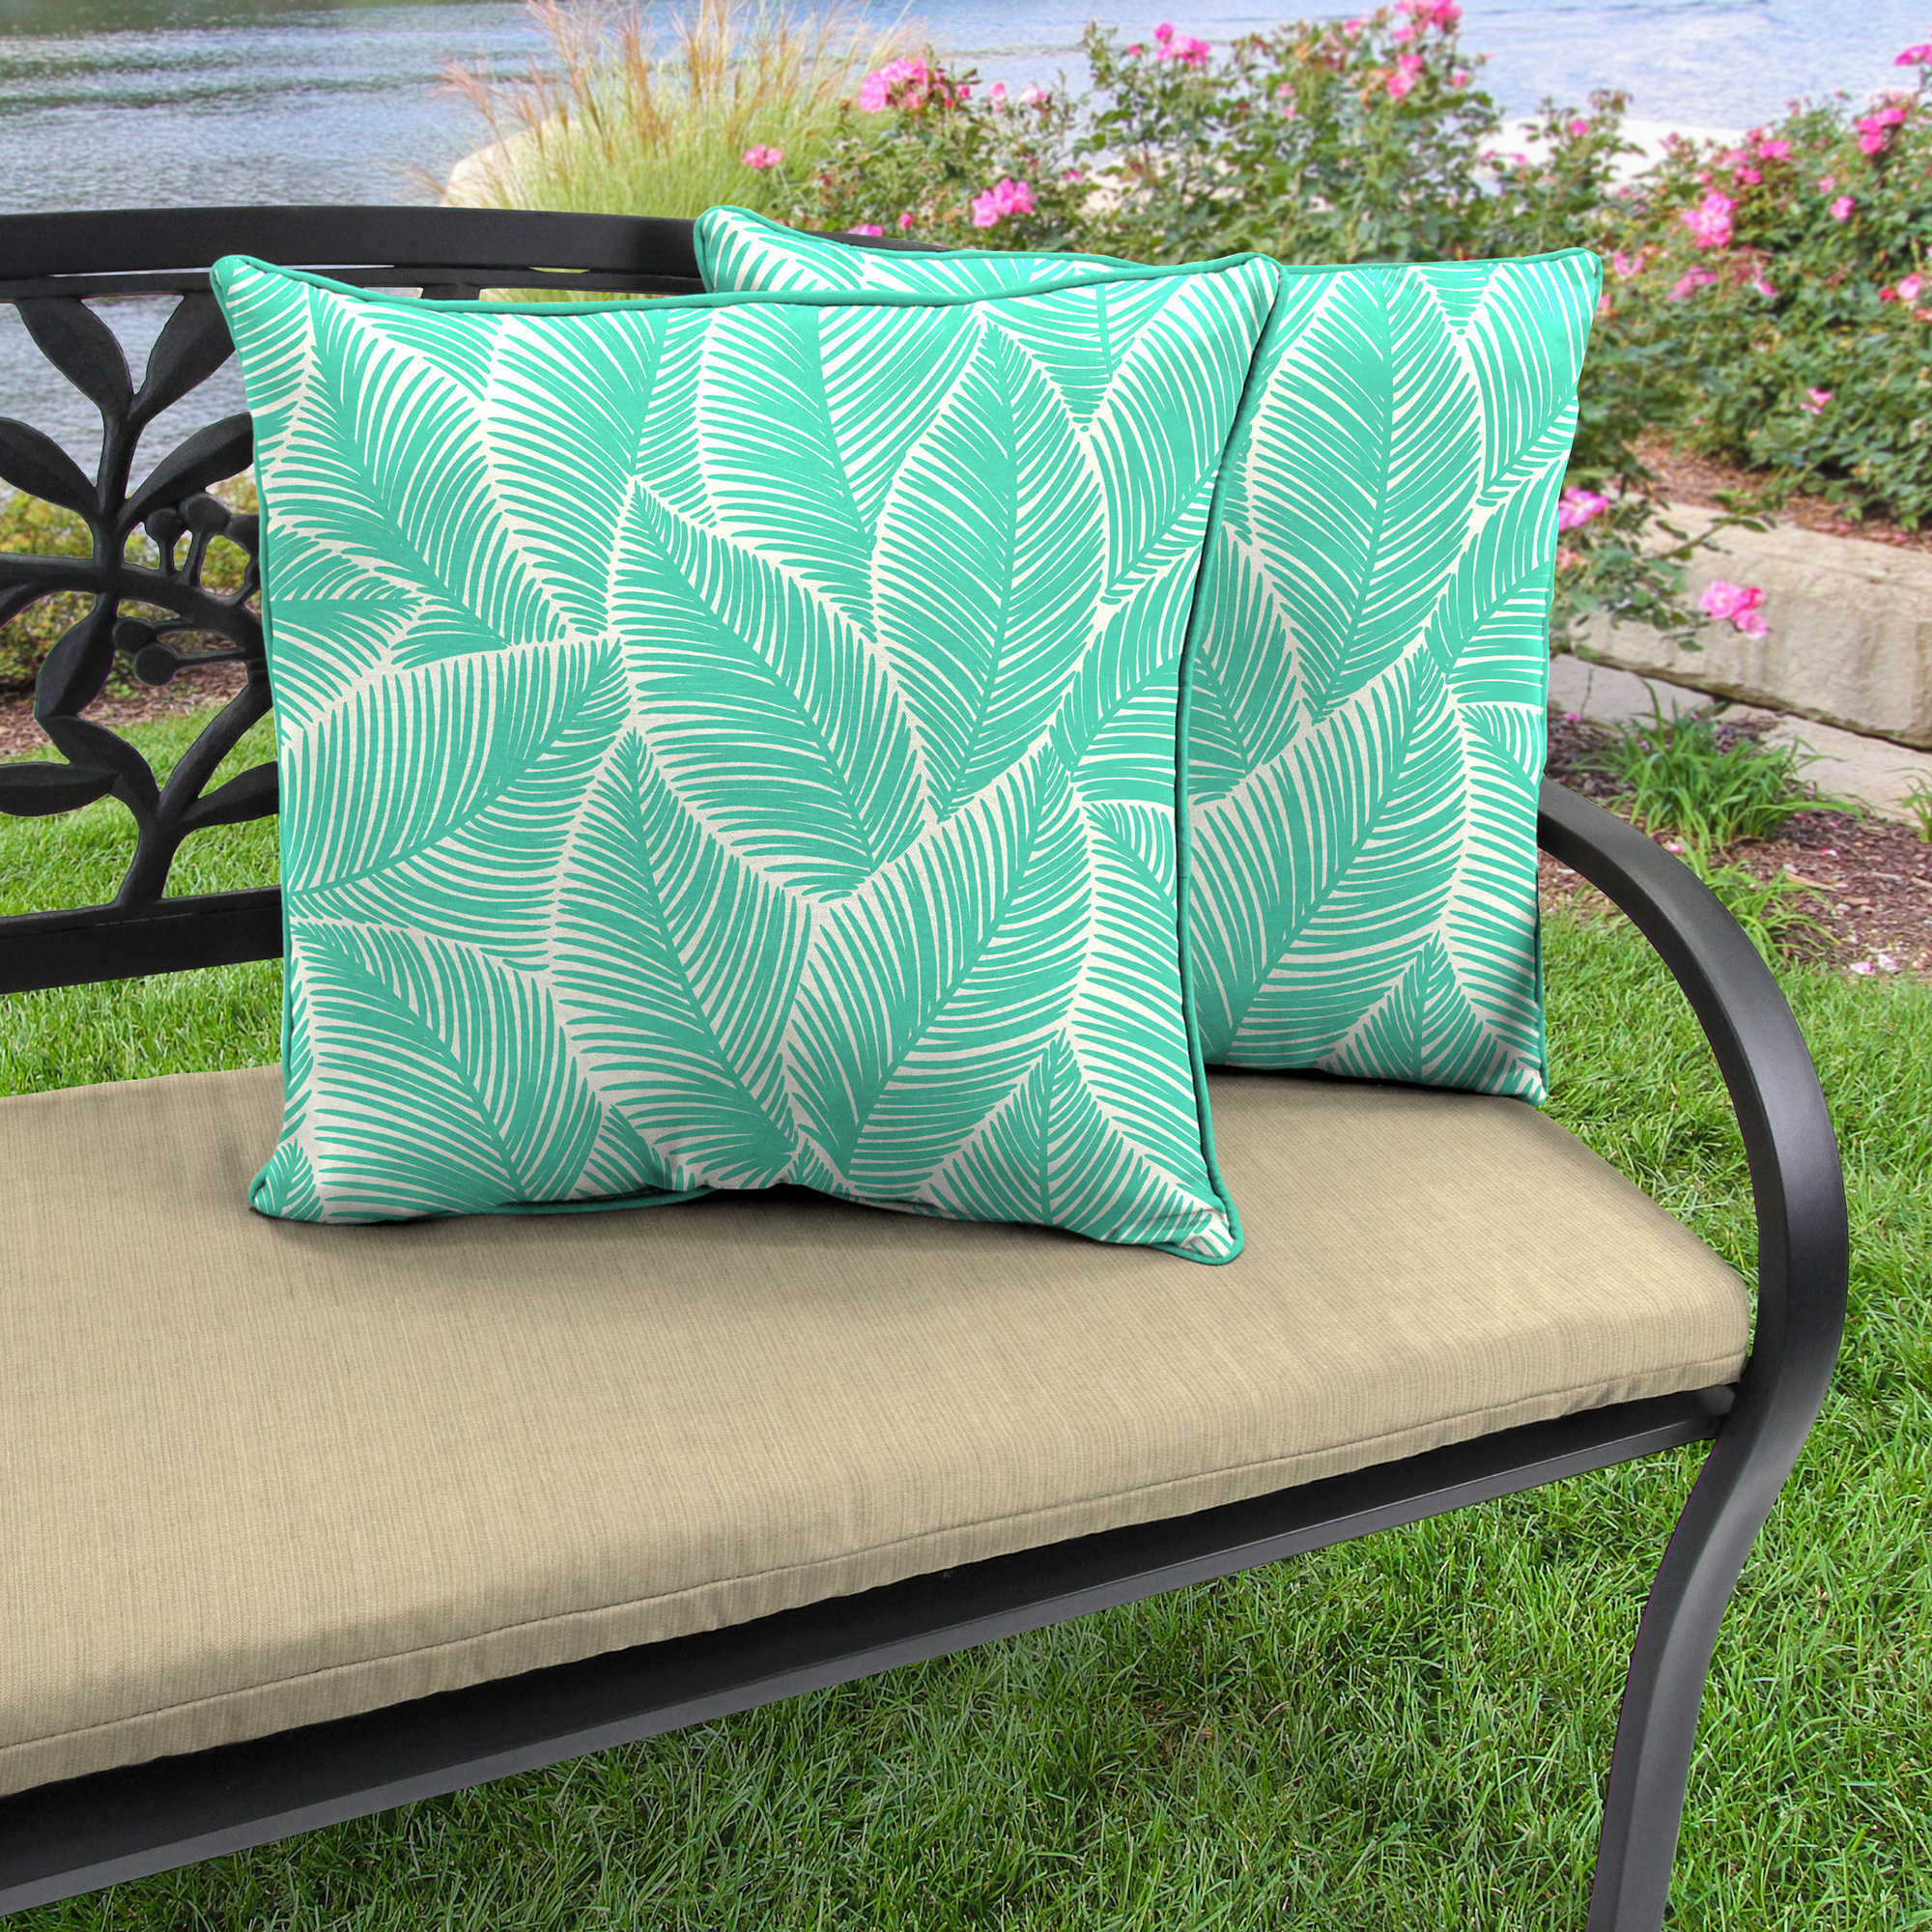 Mainstays Outdoor Throw Pillow, 16", Turquoise Palm Leaves - image 2 of 8